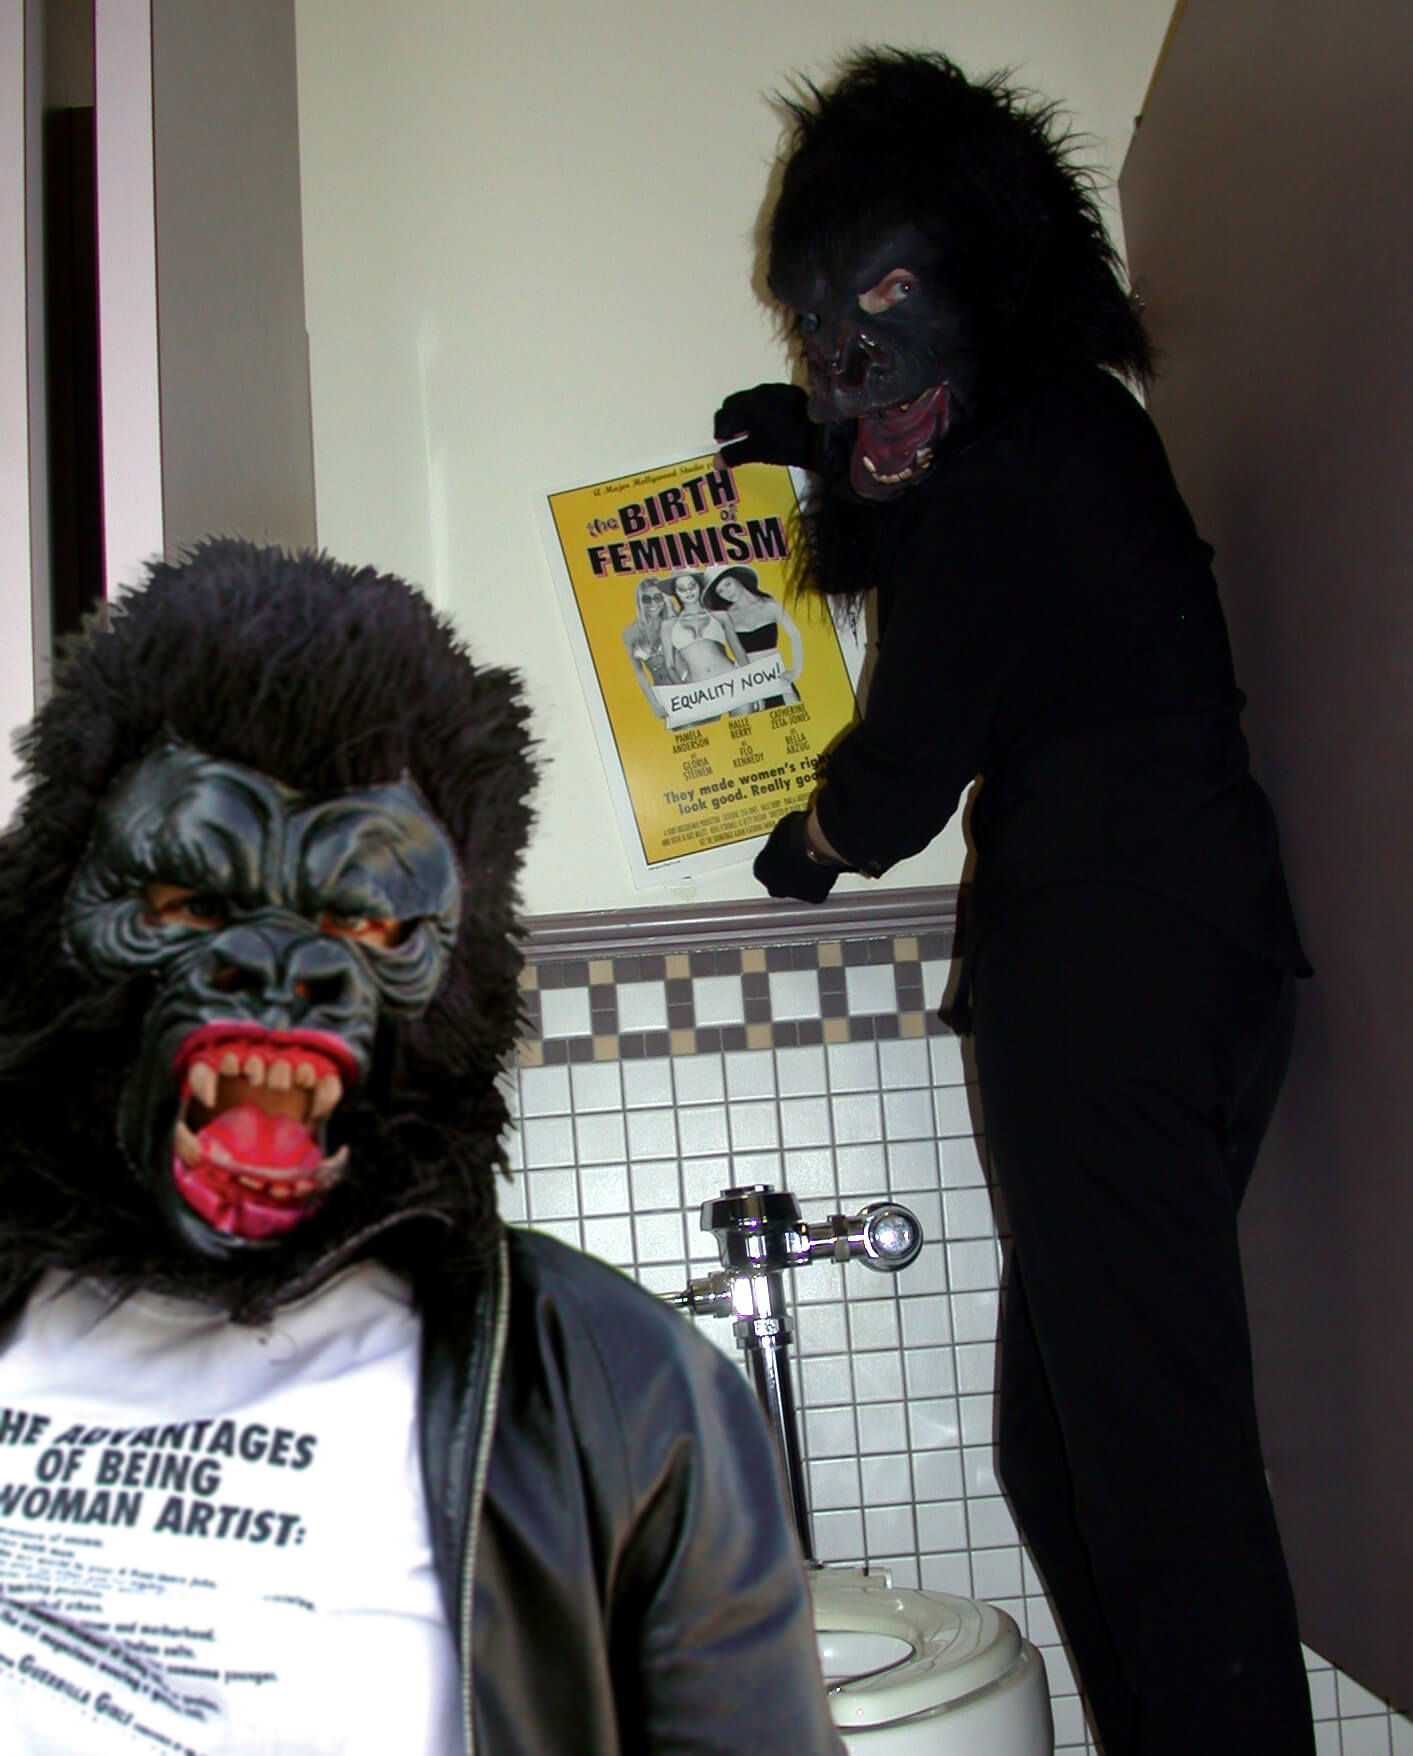 Two people in gorilla suits and face masks. One is sitting and the other stands behind them touching a poster on the wall.